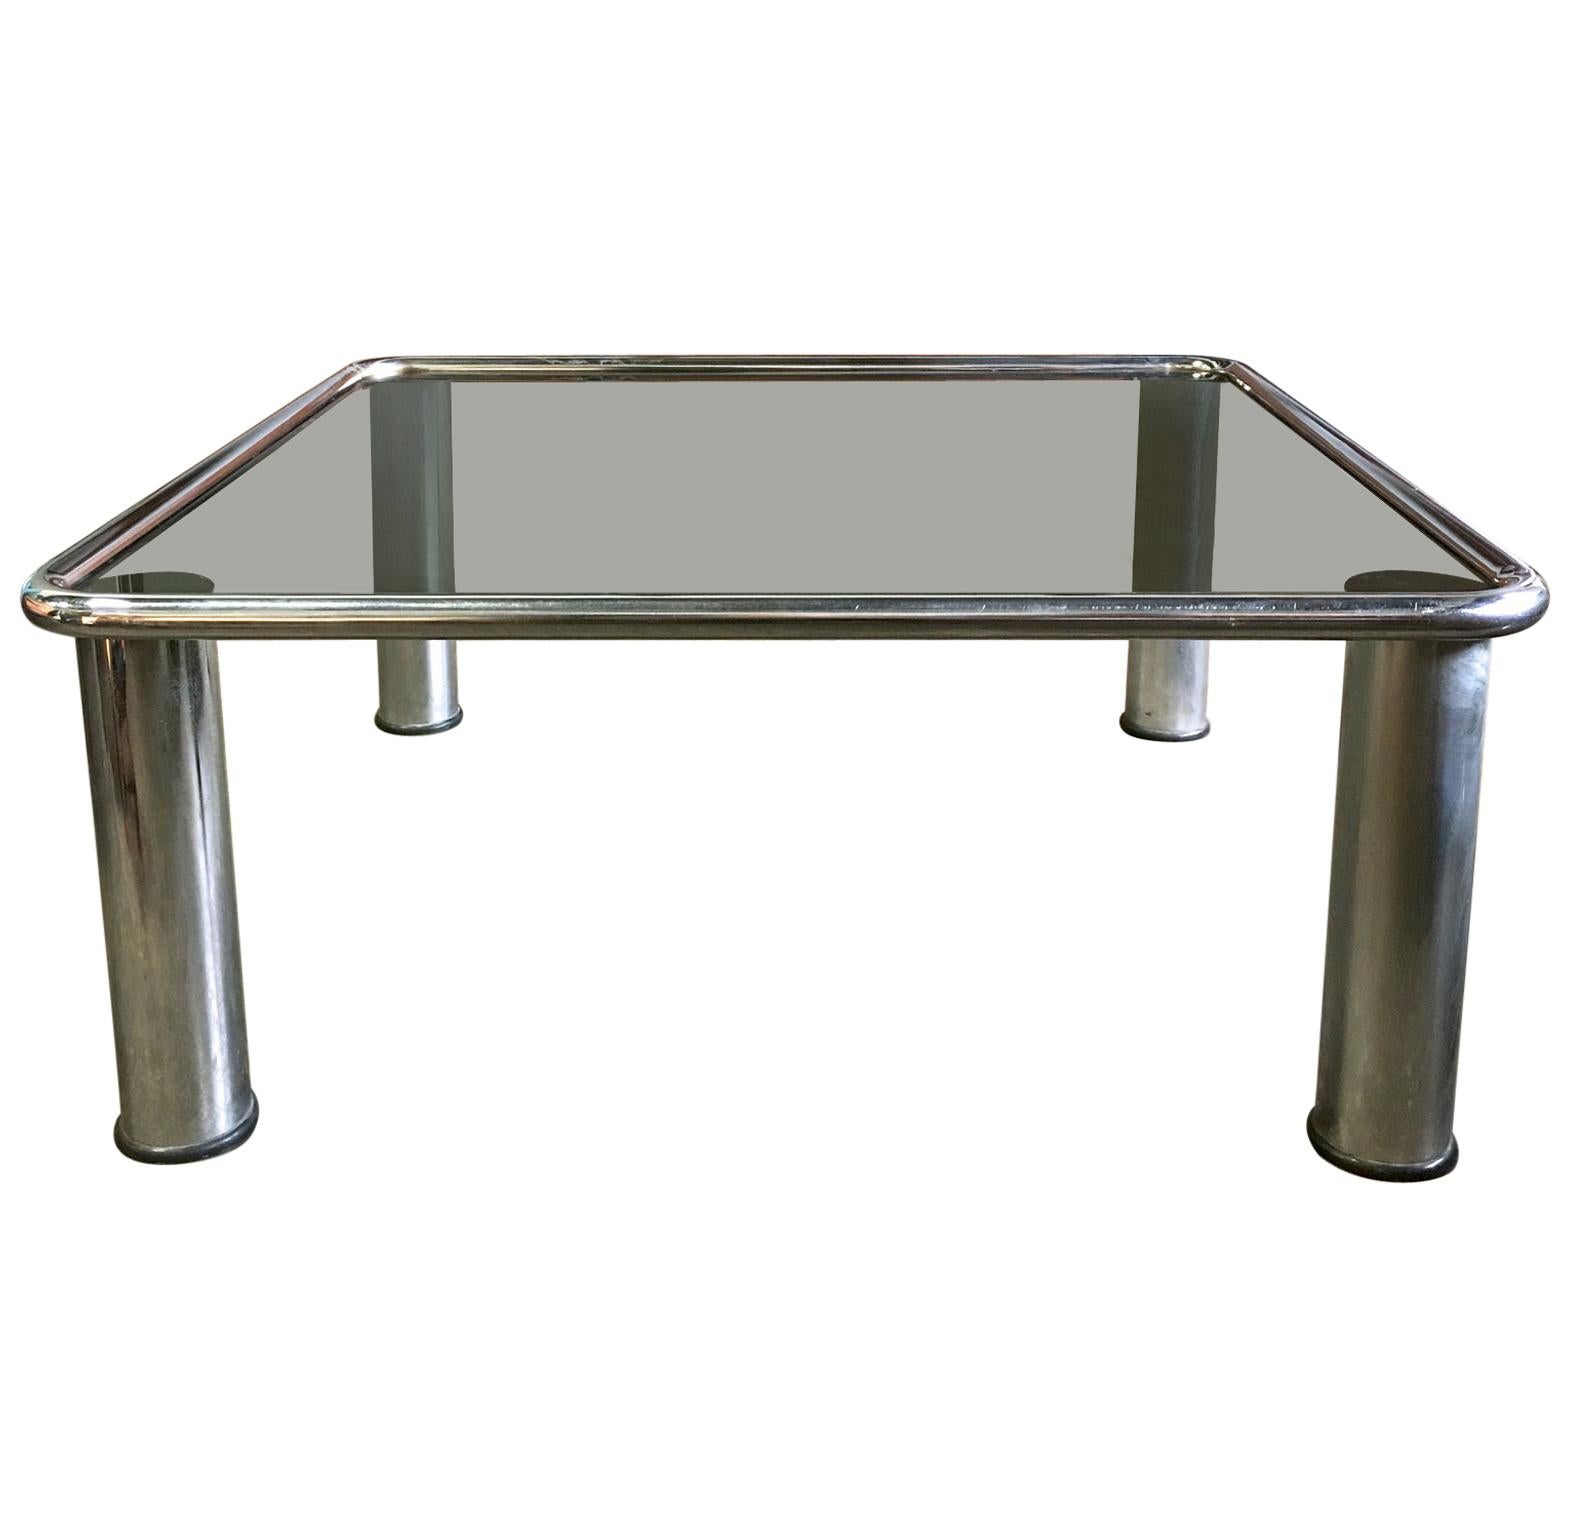 Midcentury Chrome Coffee Table by Gianfranco Frattini for Cassina